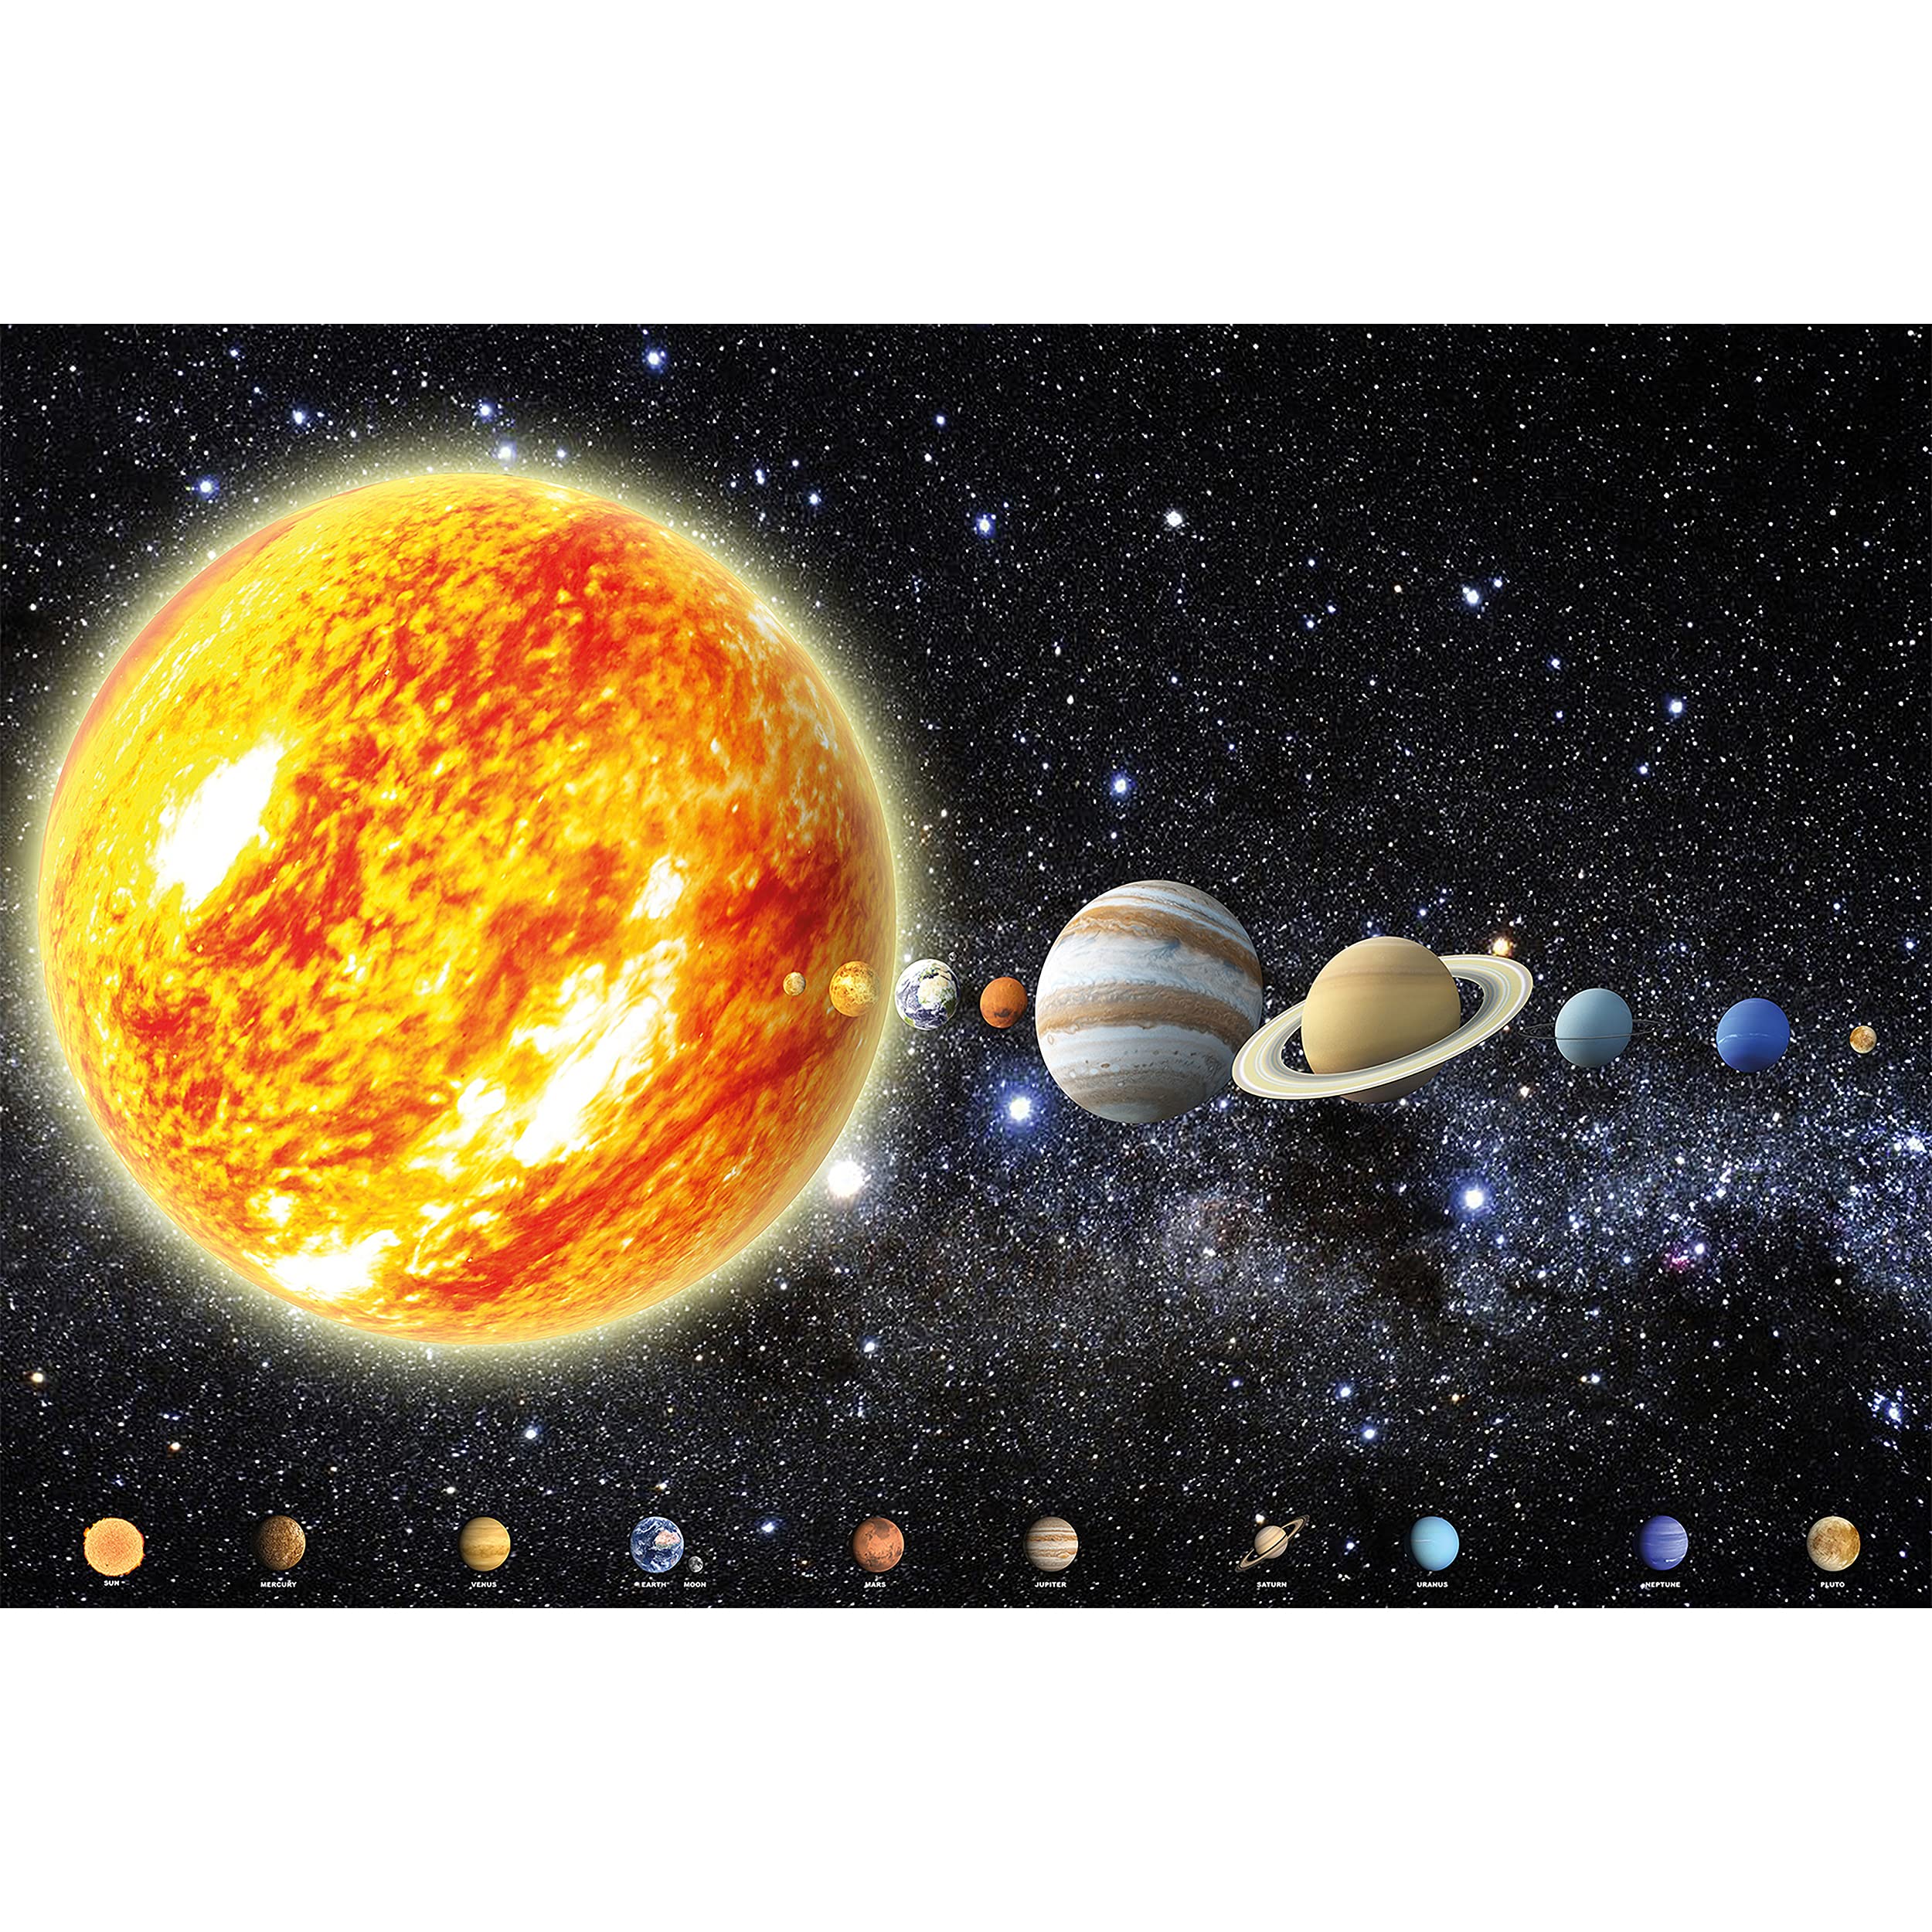 Kid’s Room Nursery Photo Wallpaper – Solar System – Picture Decoration Planets Galaxy Cosmos Space Universe Sky Stars Earth Image Decor Wall Mural ...